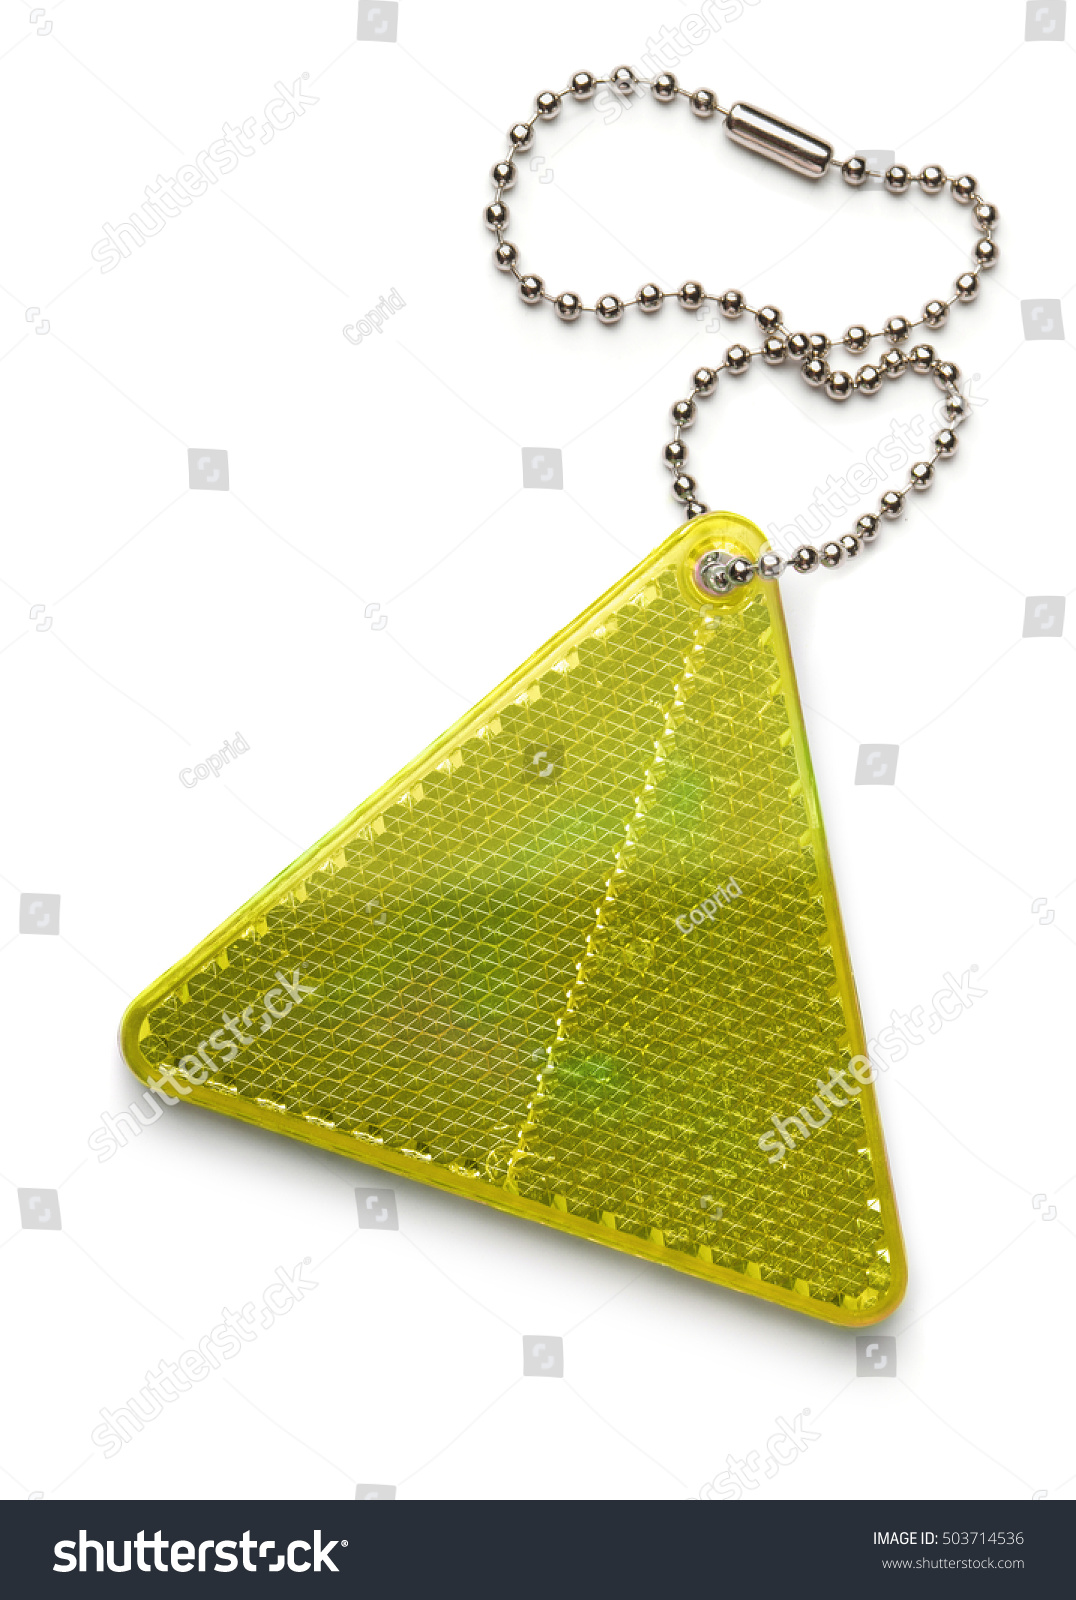 Yellow pedestrian safety reflector keyring isolated on white #503714536